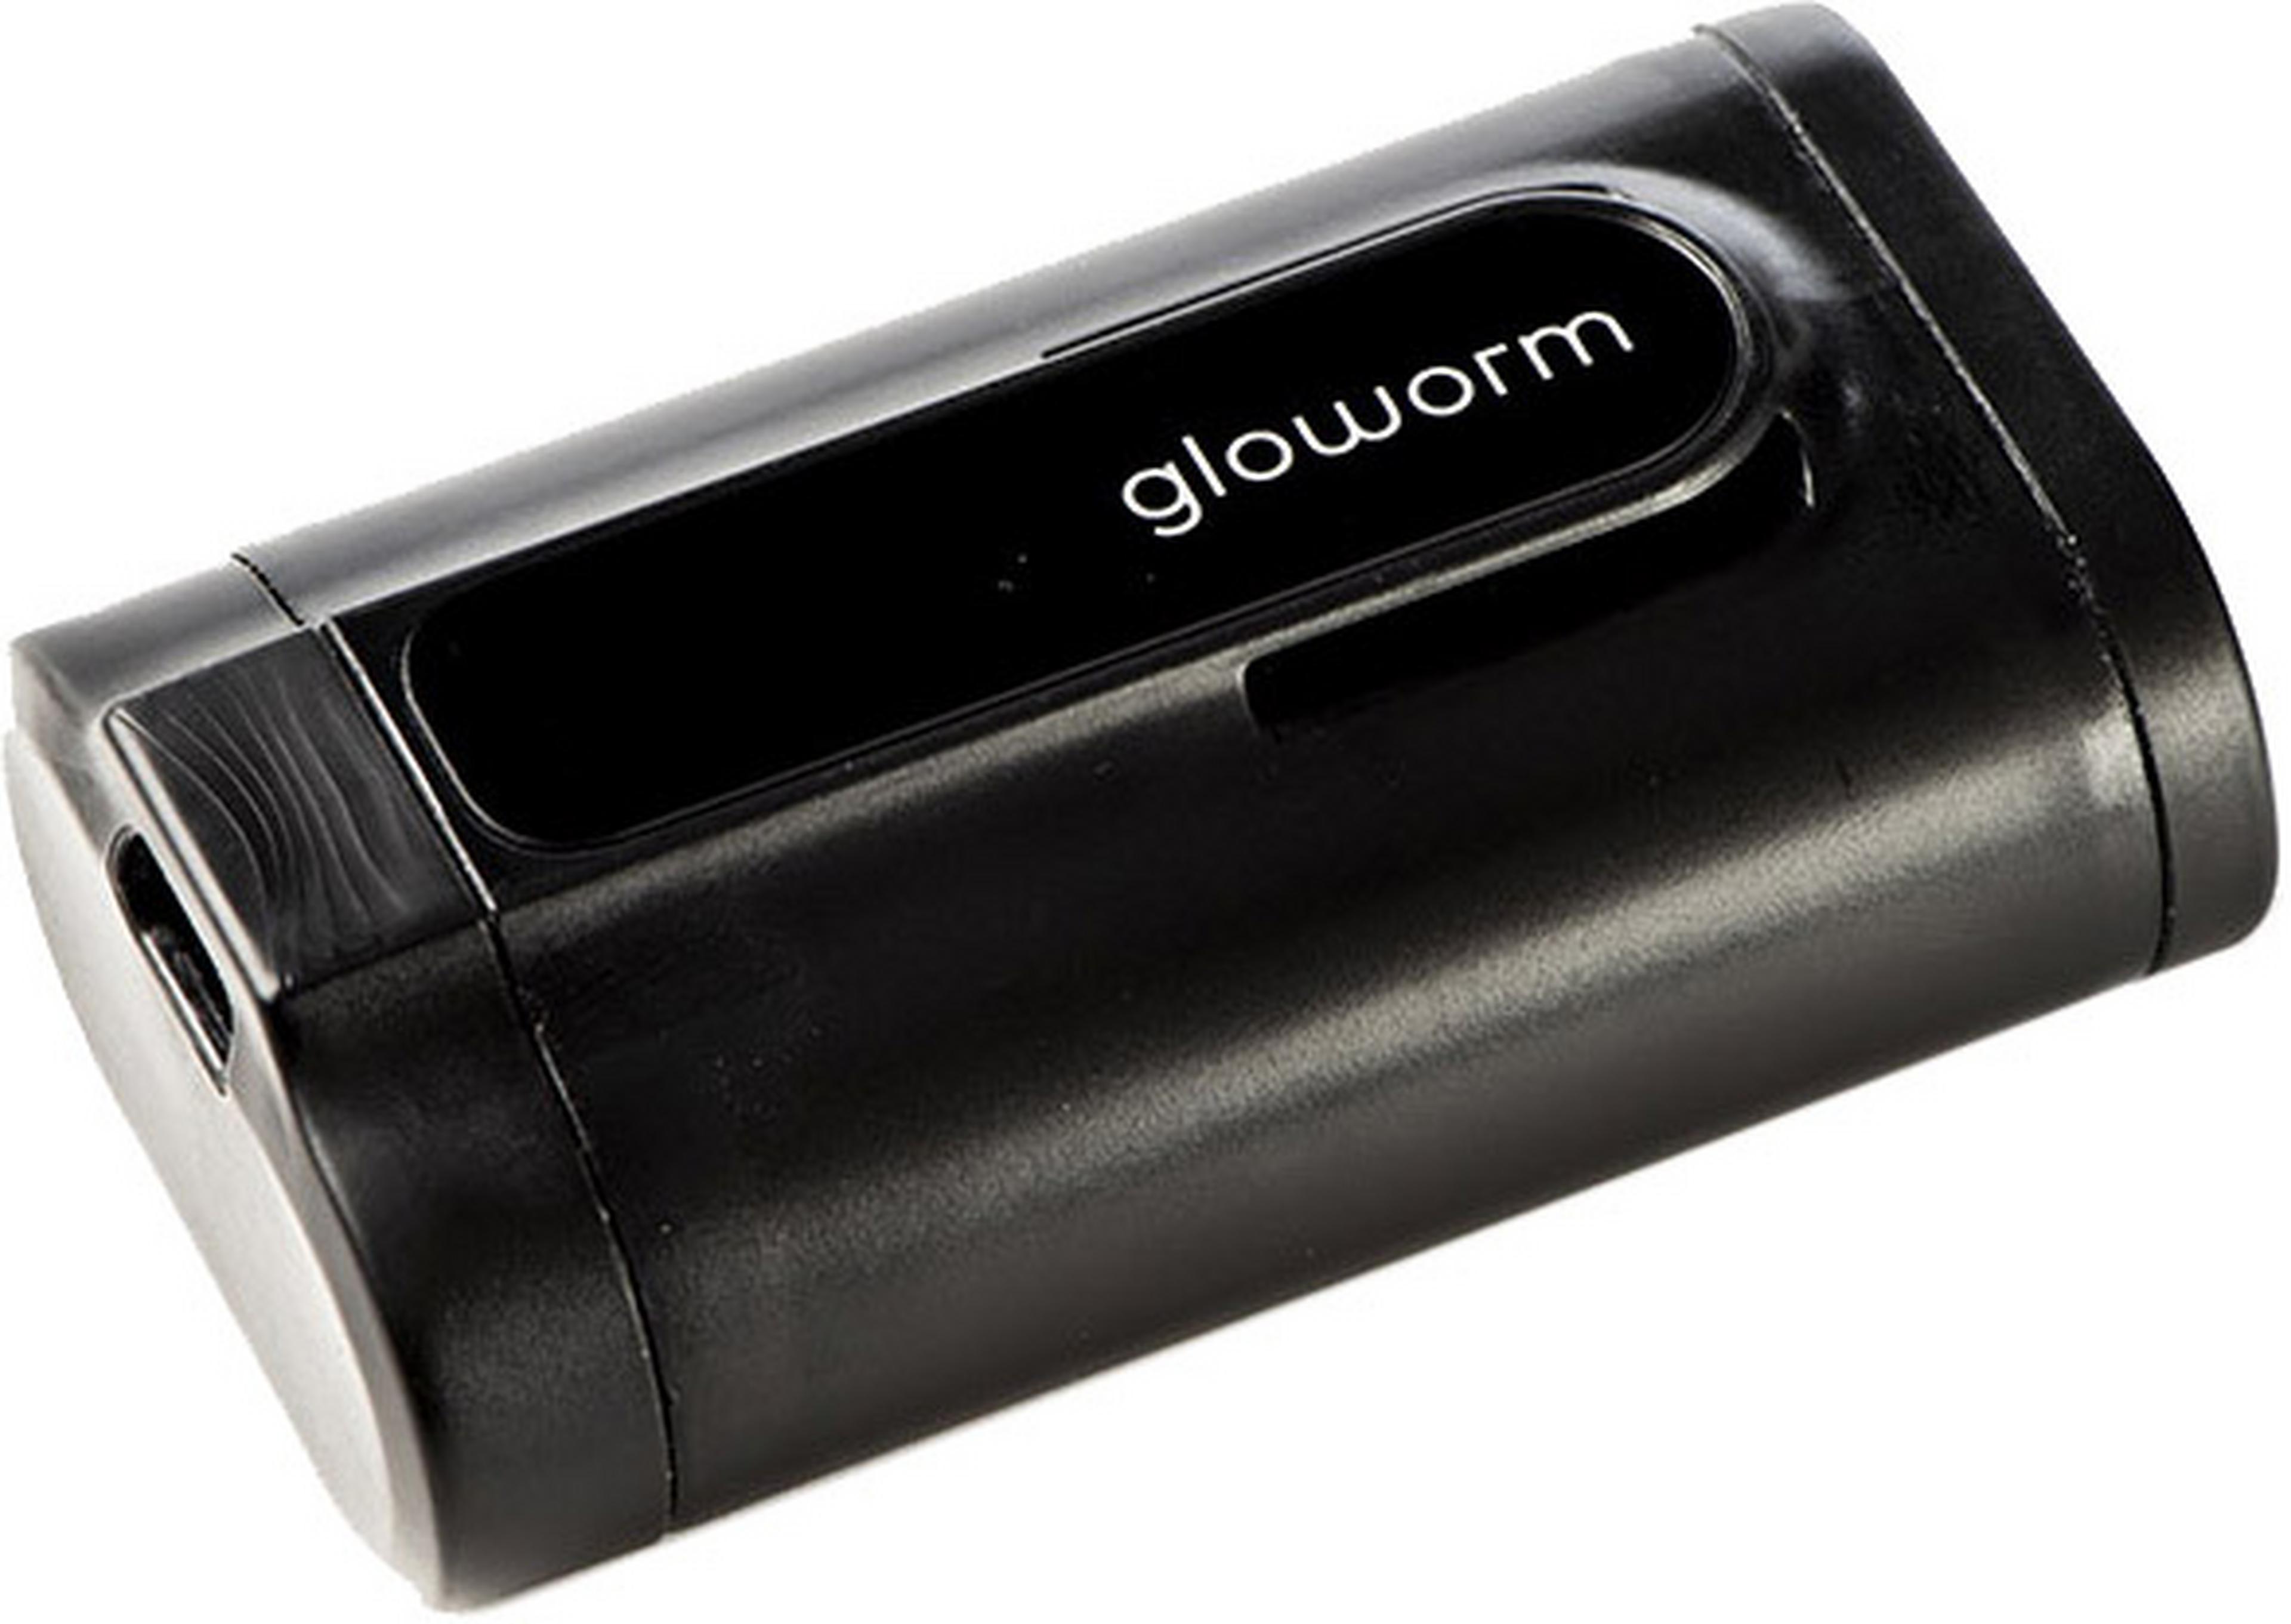 Gloworm Power Pack 5 Battery (G2.0)